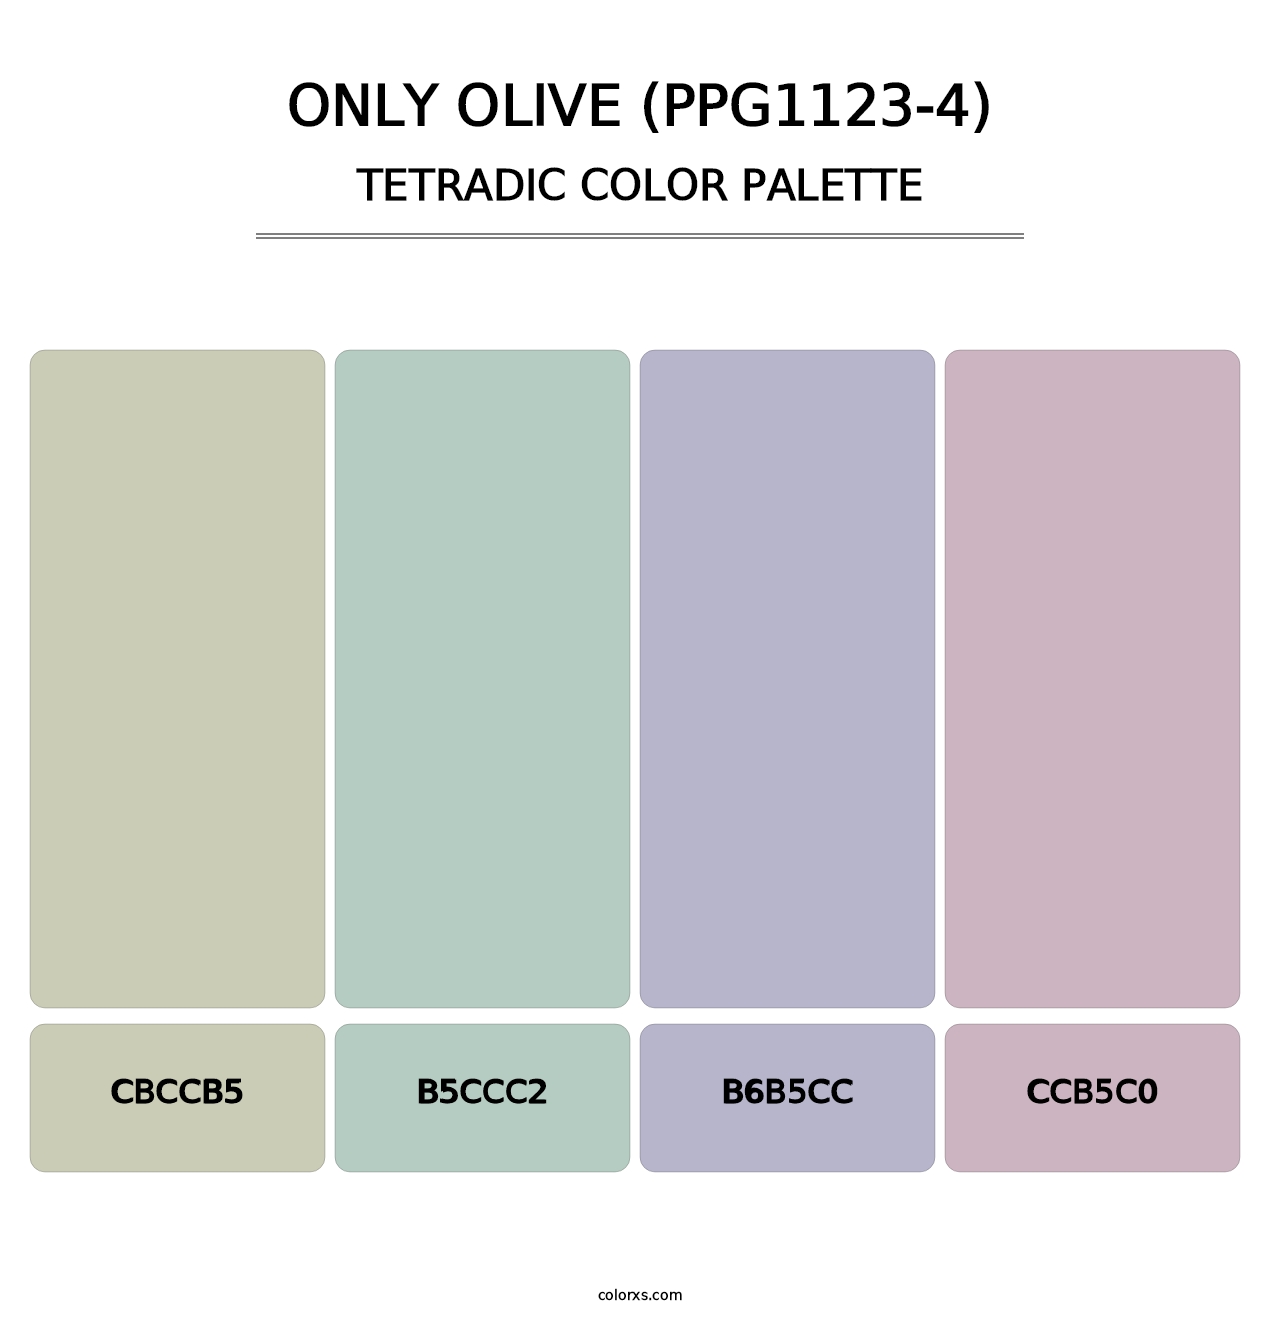 Only Olive (PPG1123-4) - Tetradic Color Palette